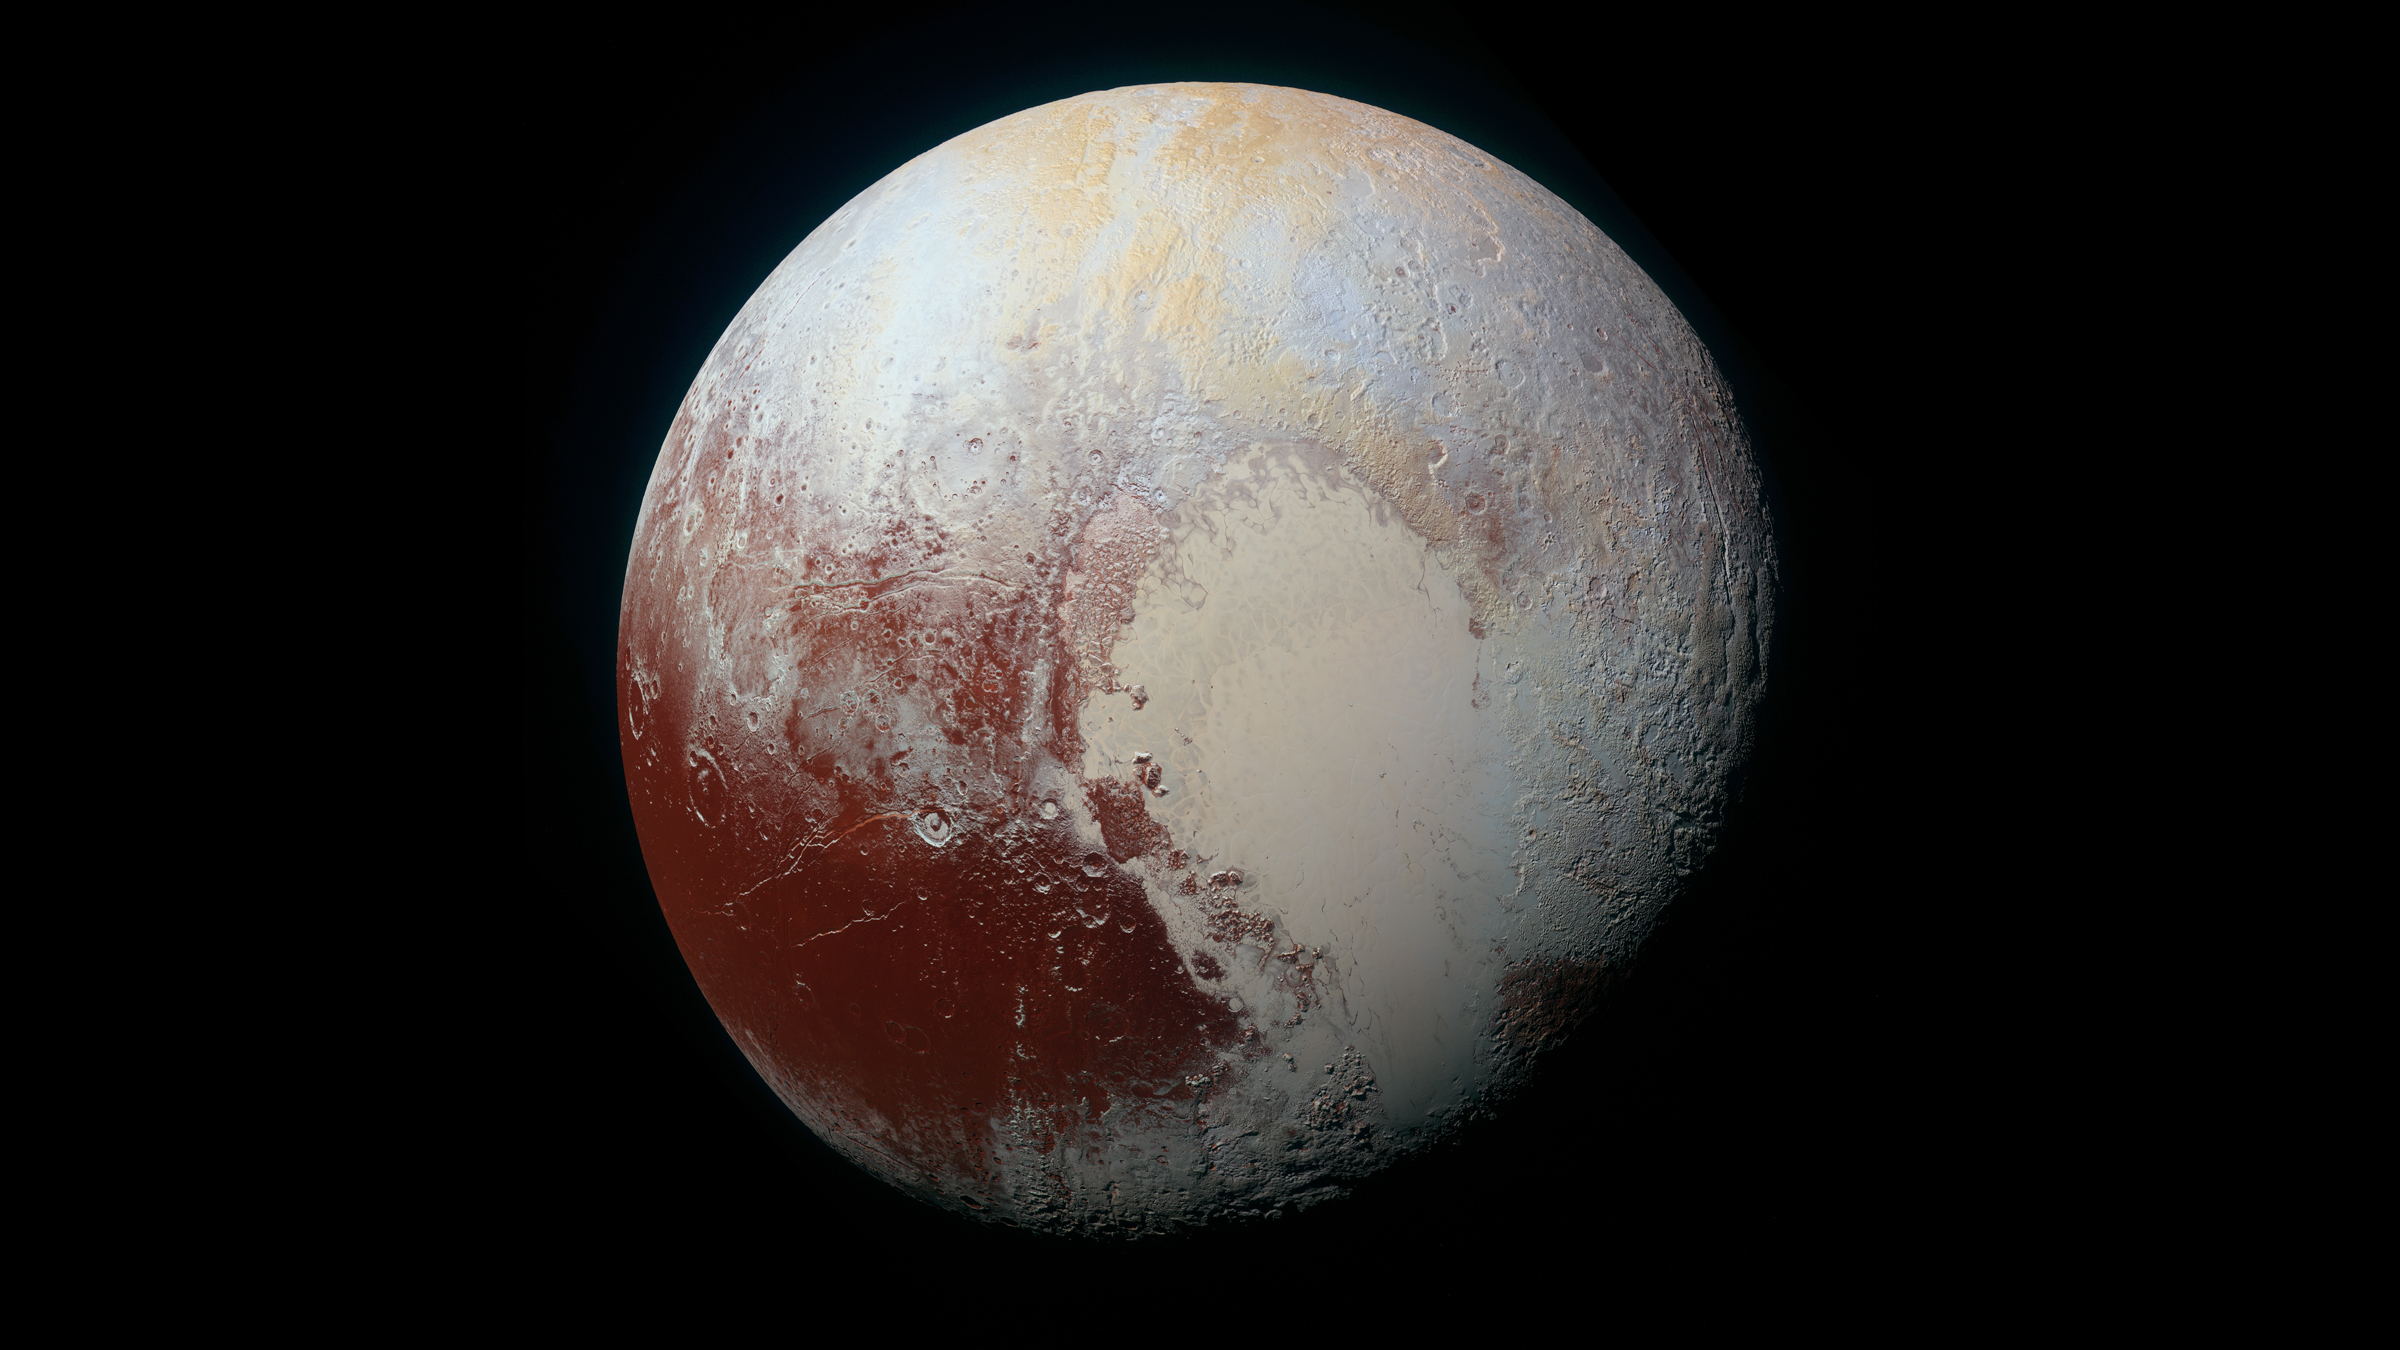 NASA’s New Horizons spacecraft took this enhanced color image of Pluto on July 14, 2015.